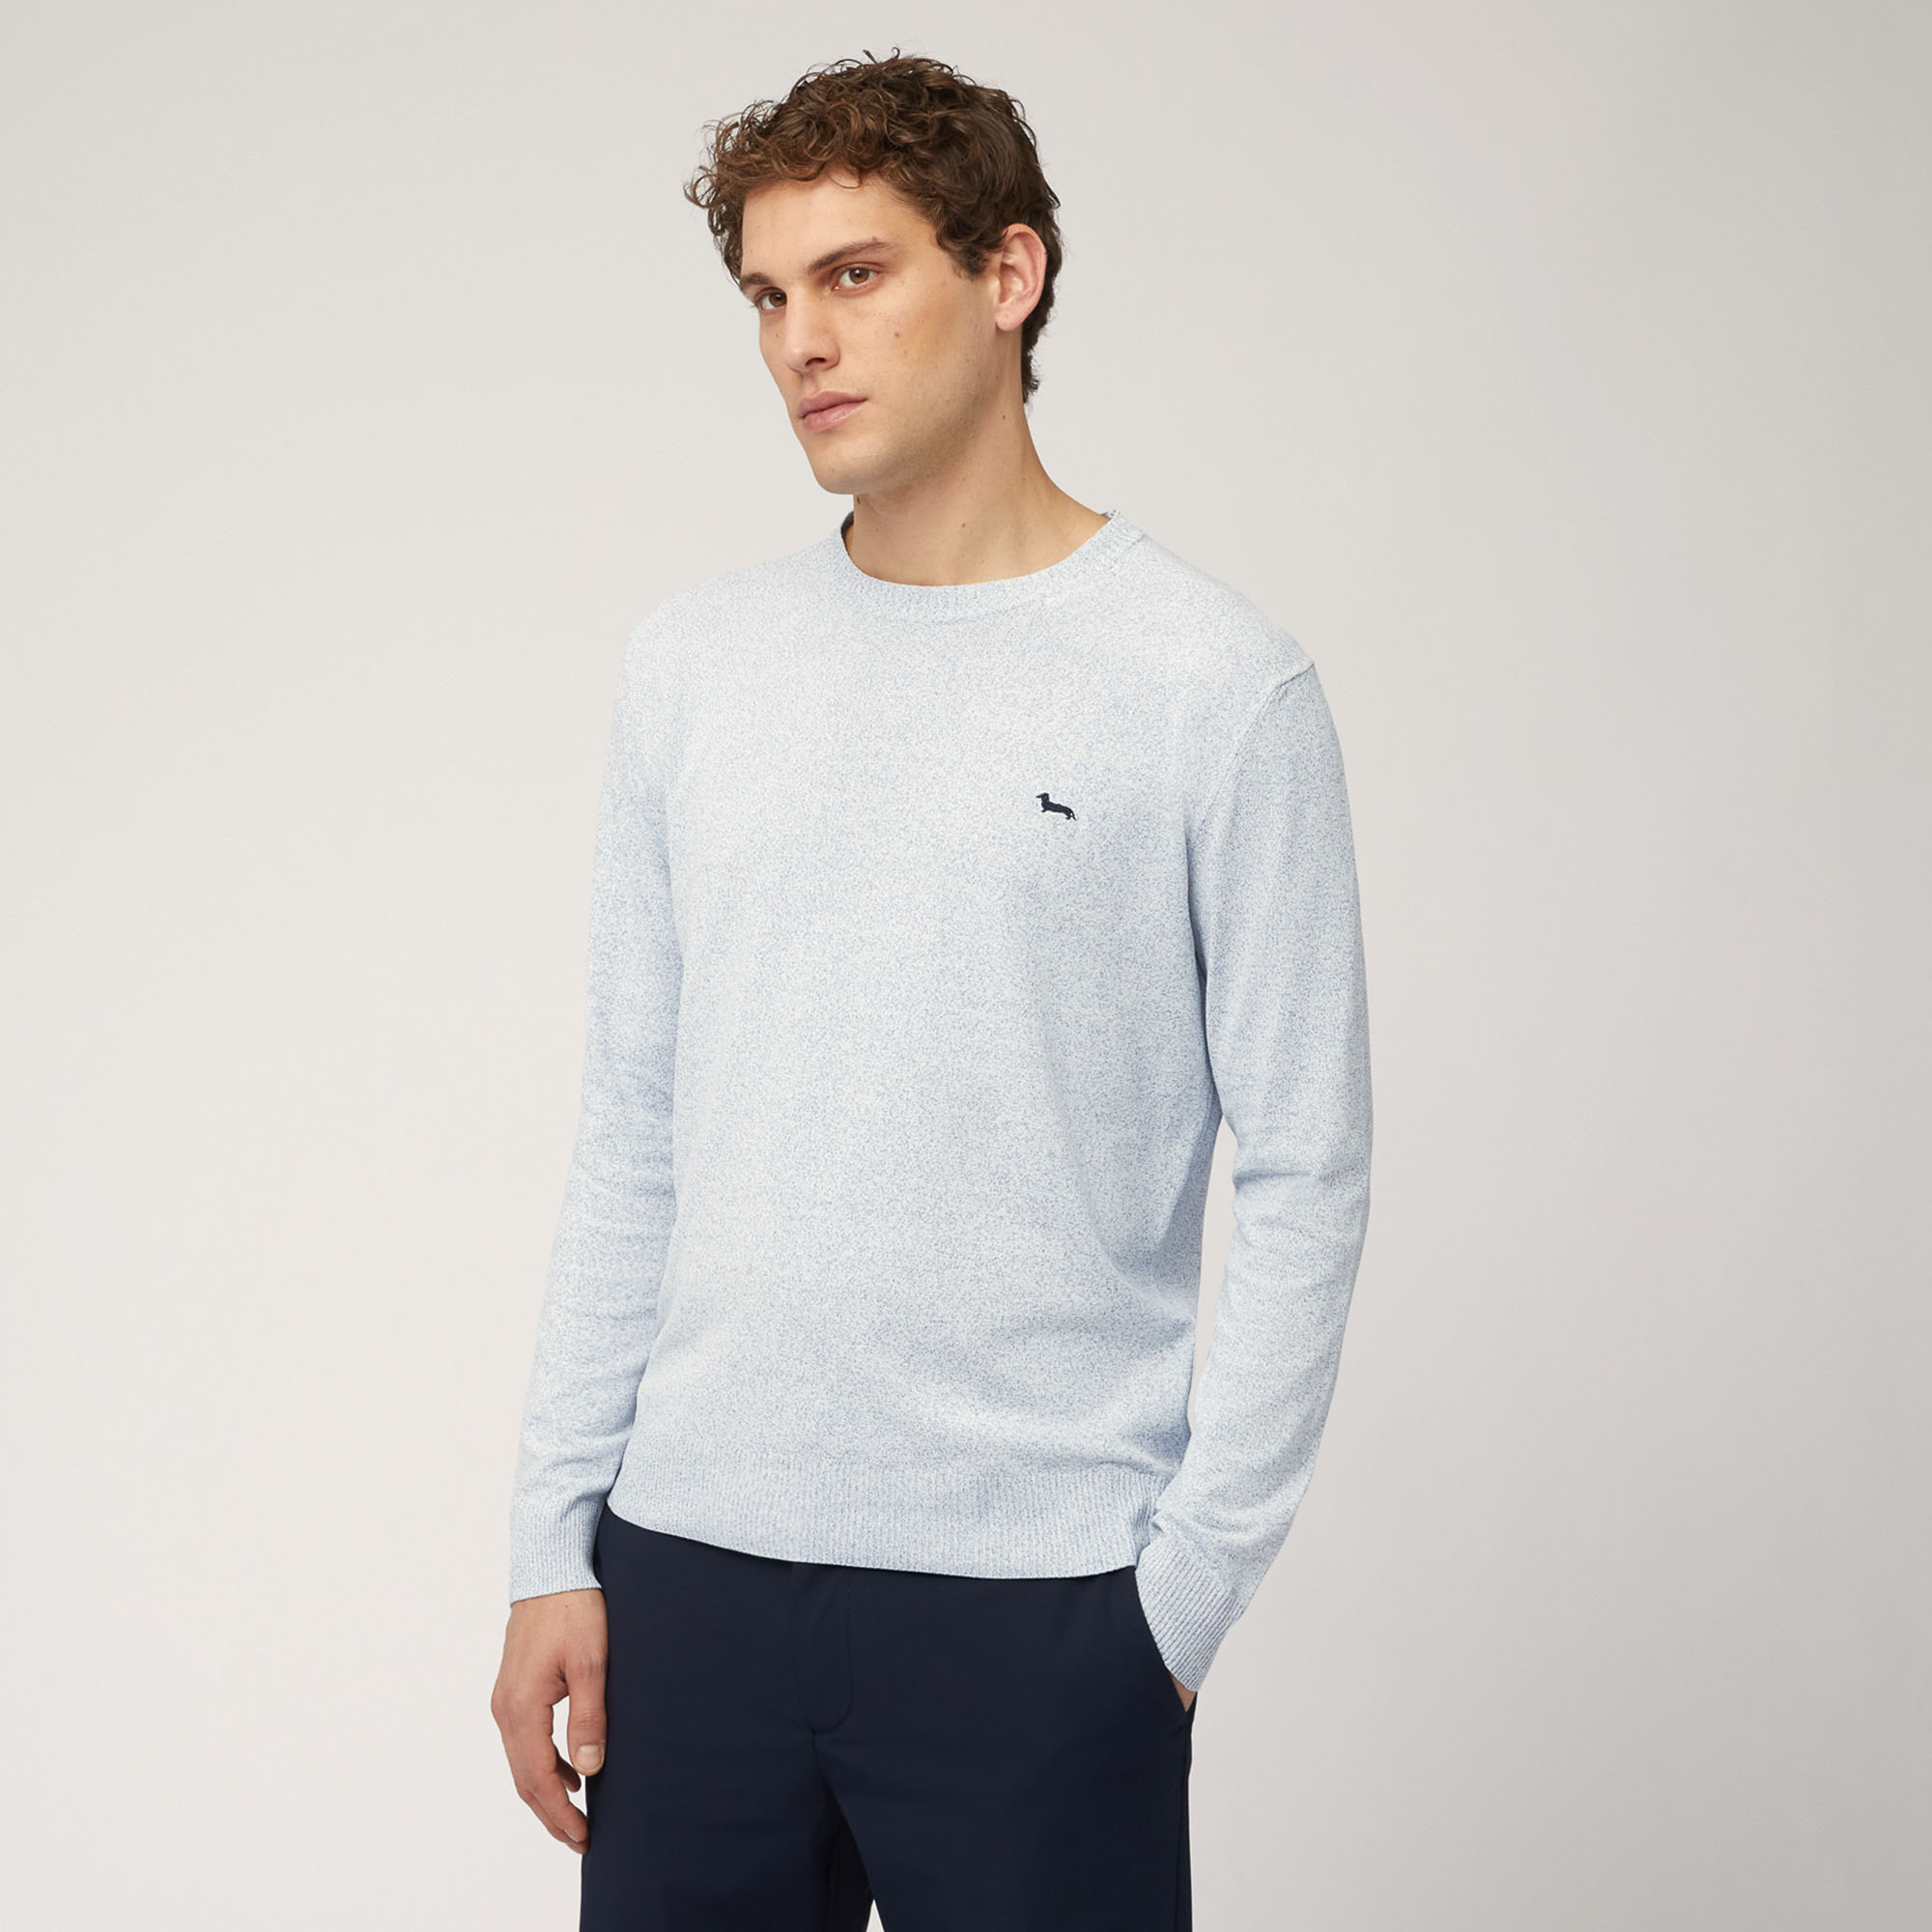 Crew Neck Pullover in Technical Yarn, Blue, large image number 0